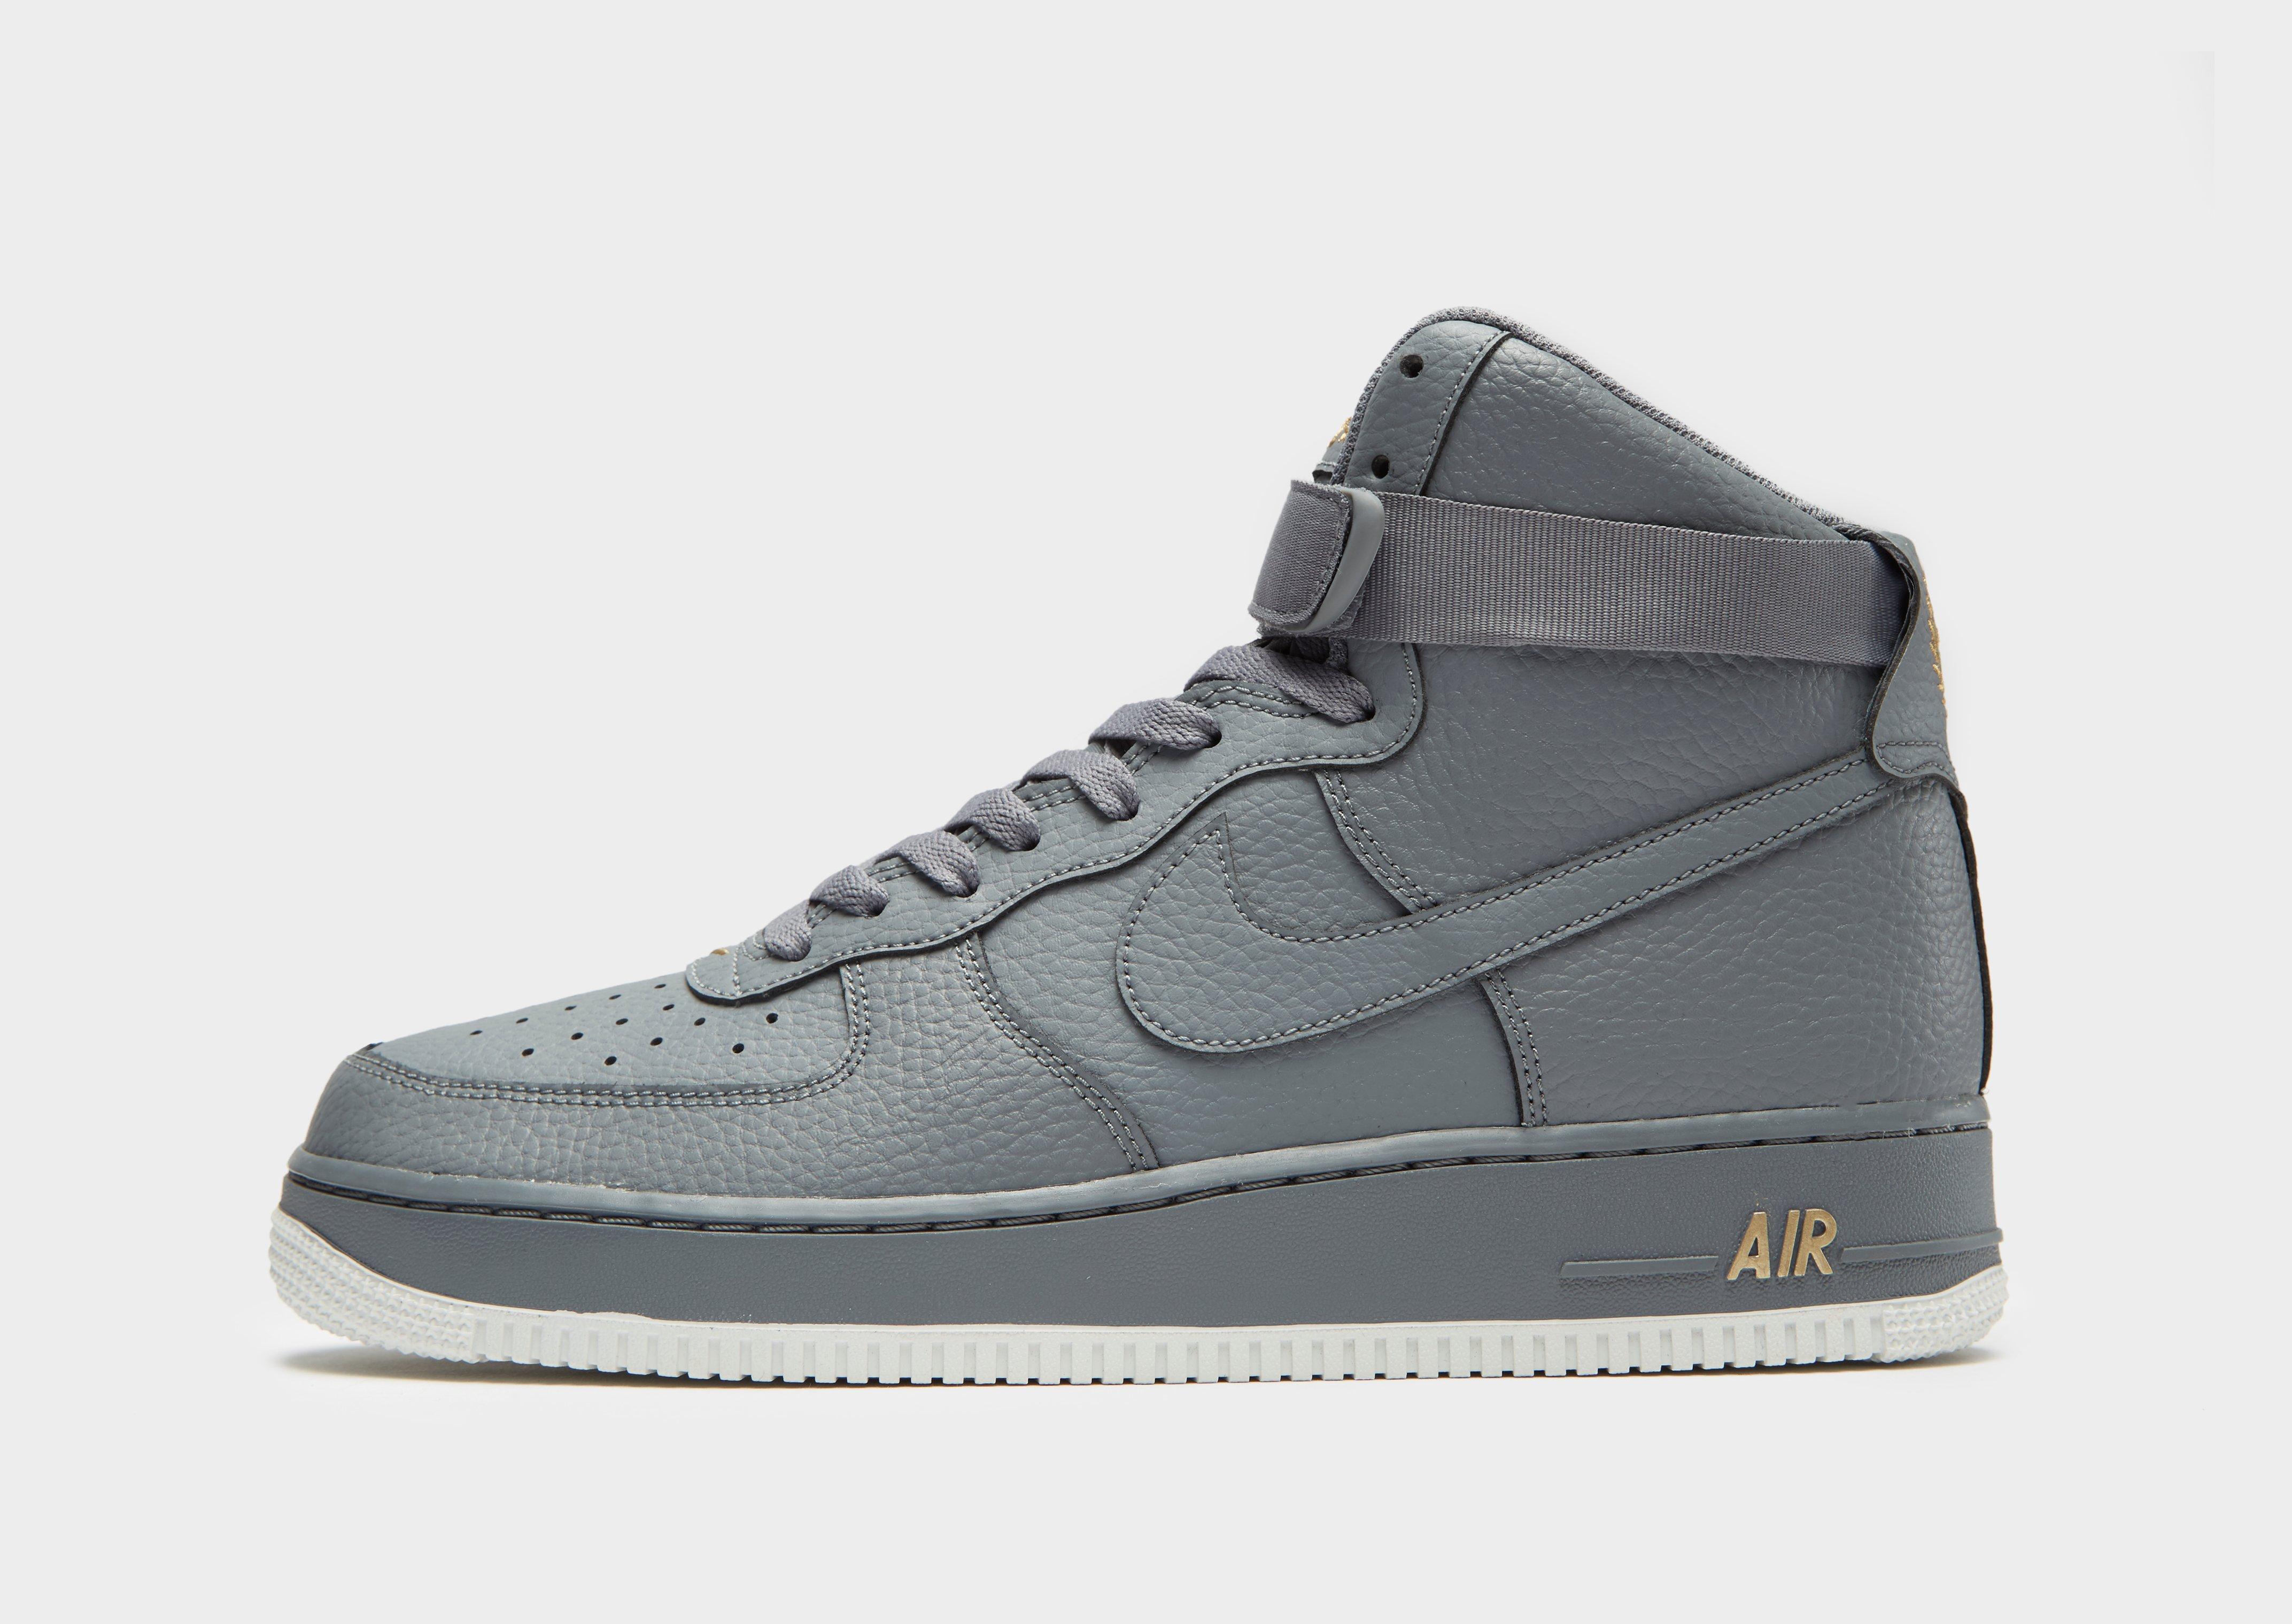 Nike Leather Air Force 1 High in Grey (Gray) for Men - Lyst